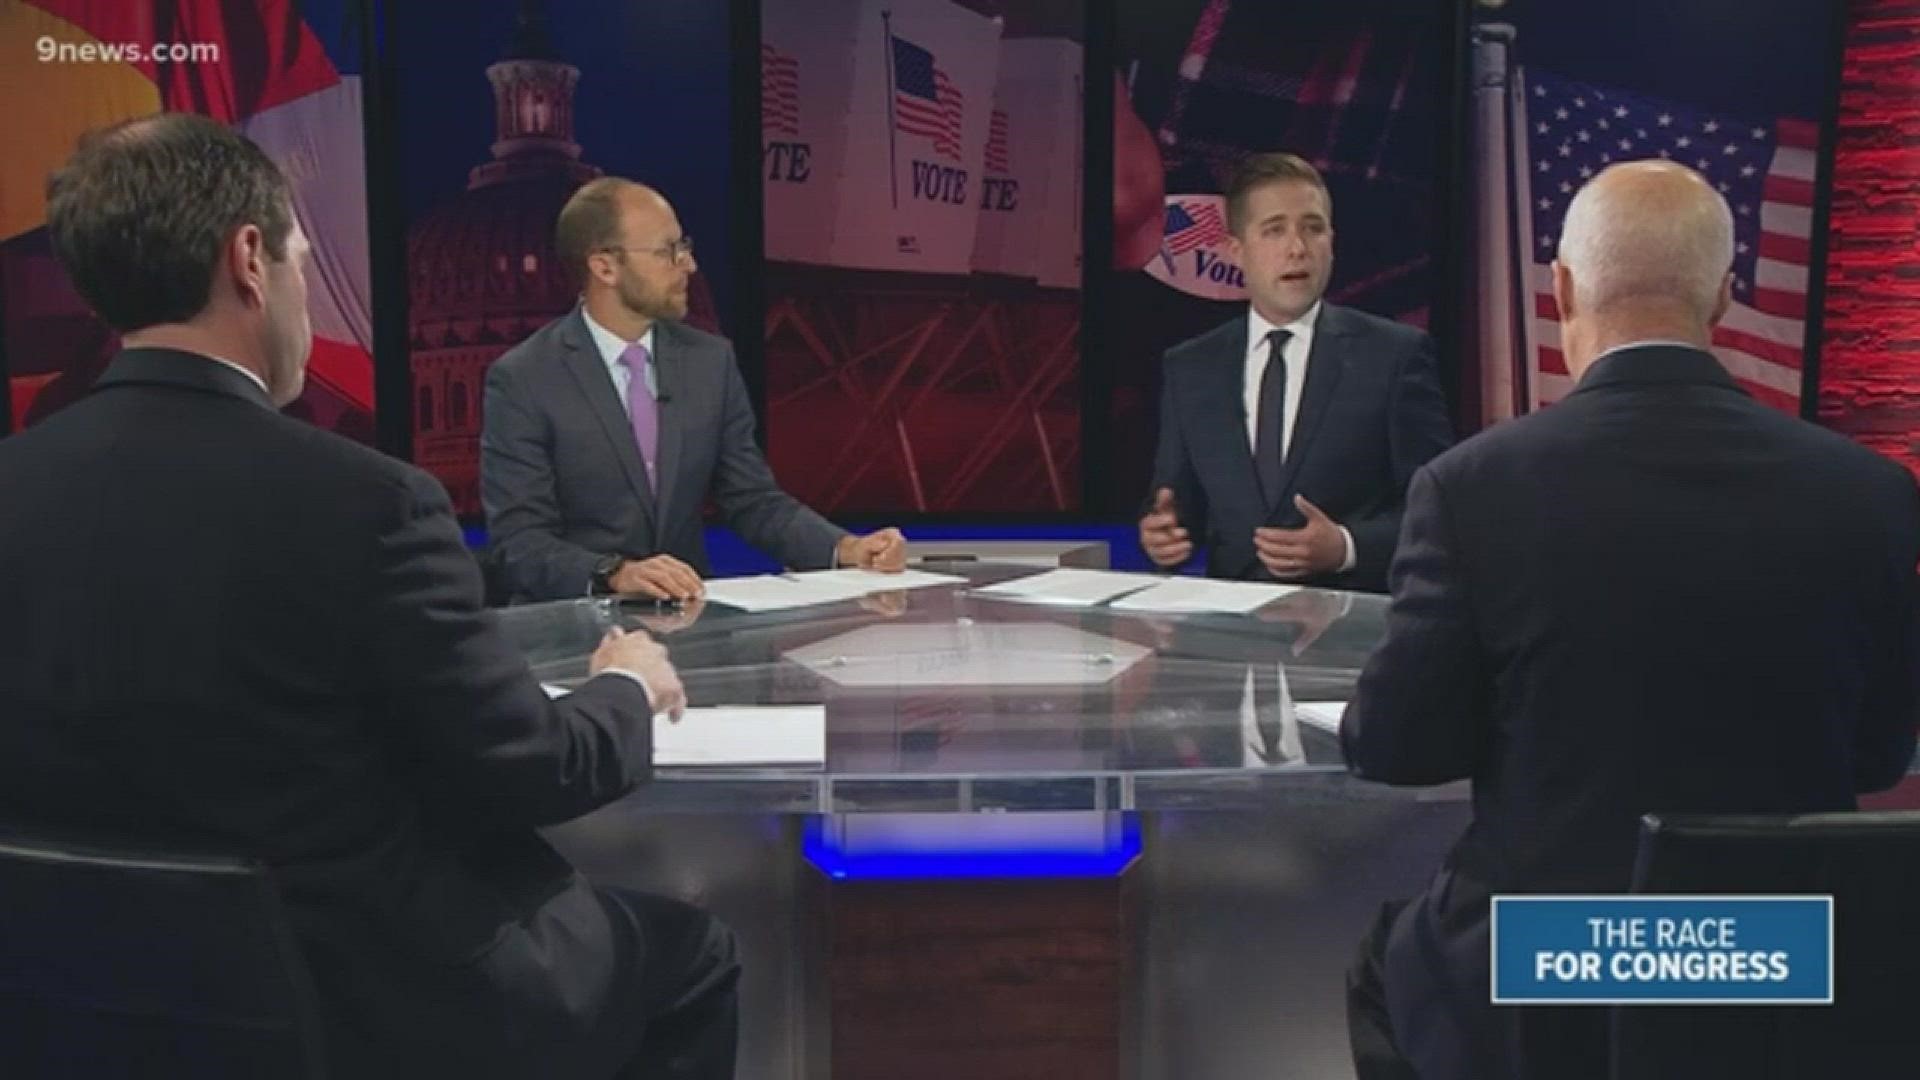 Mike Coffman and Jason Crow discuss pre-existing conditions healthcare coverage during their debate on 9NEWS.